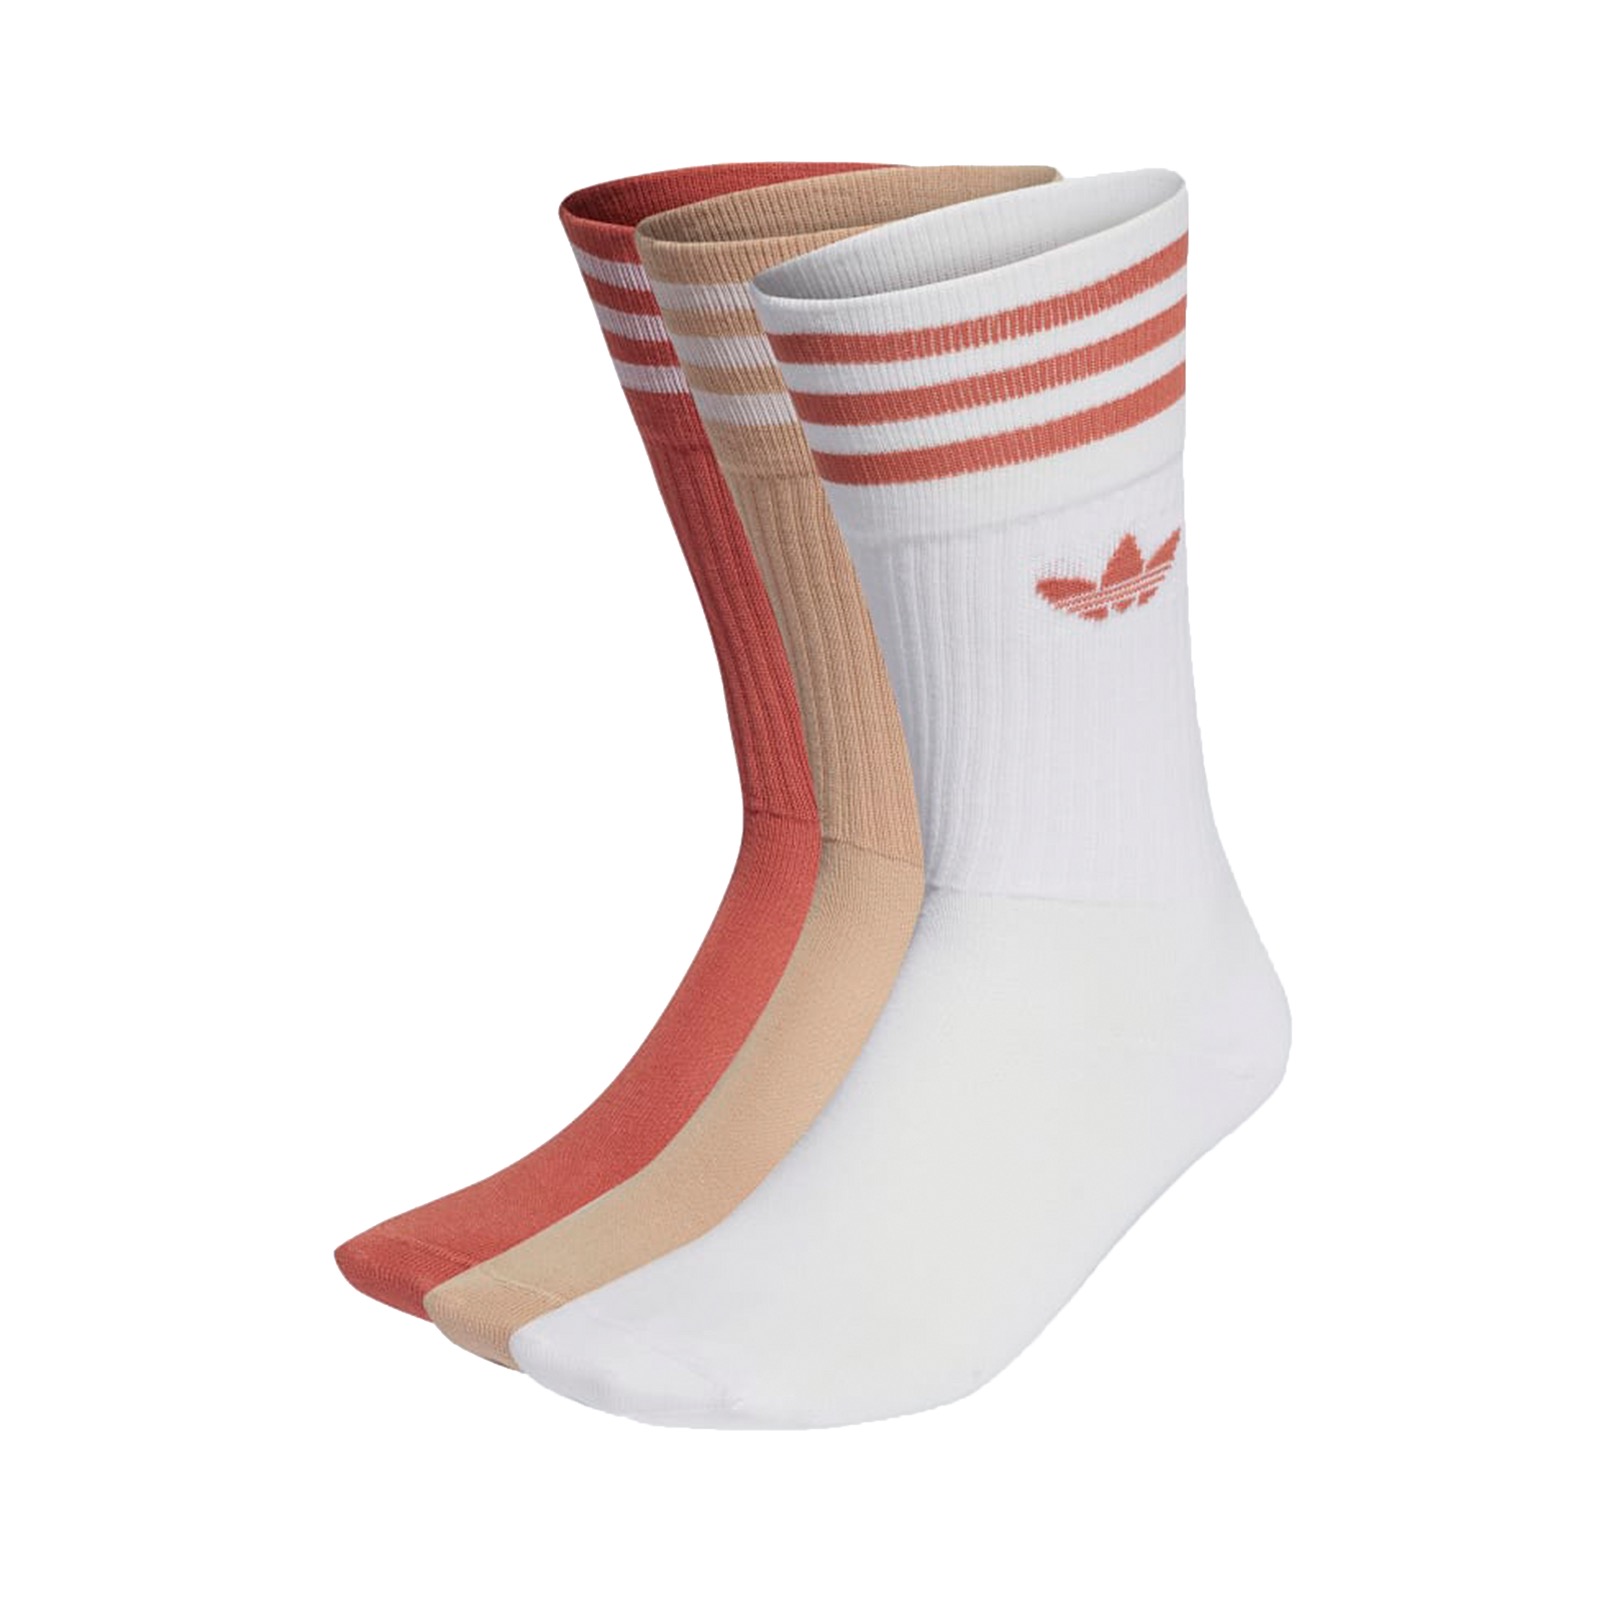 Adidas Solid Crew Sock 3 Pair
White / Beige Earth